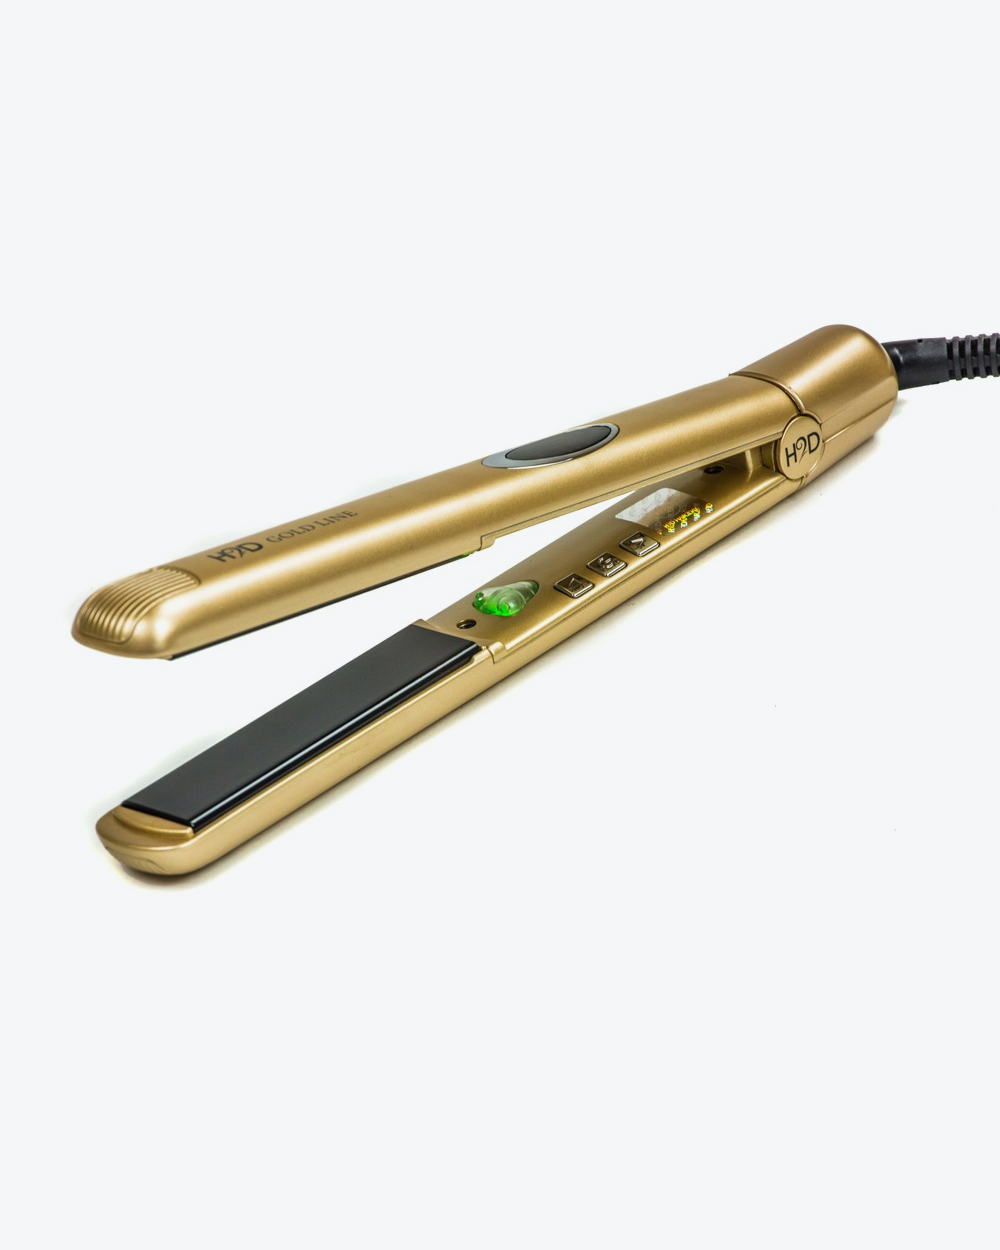 H2D VI GOLD LINE HAIR STRAIGHTENERS / Was £ - Now £